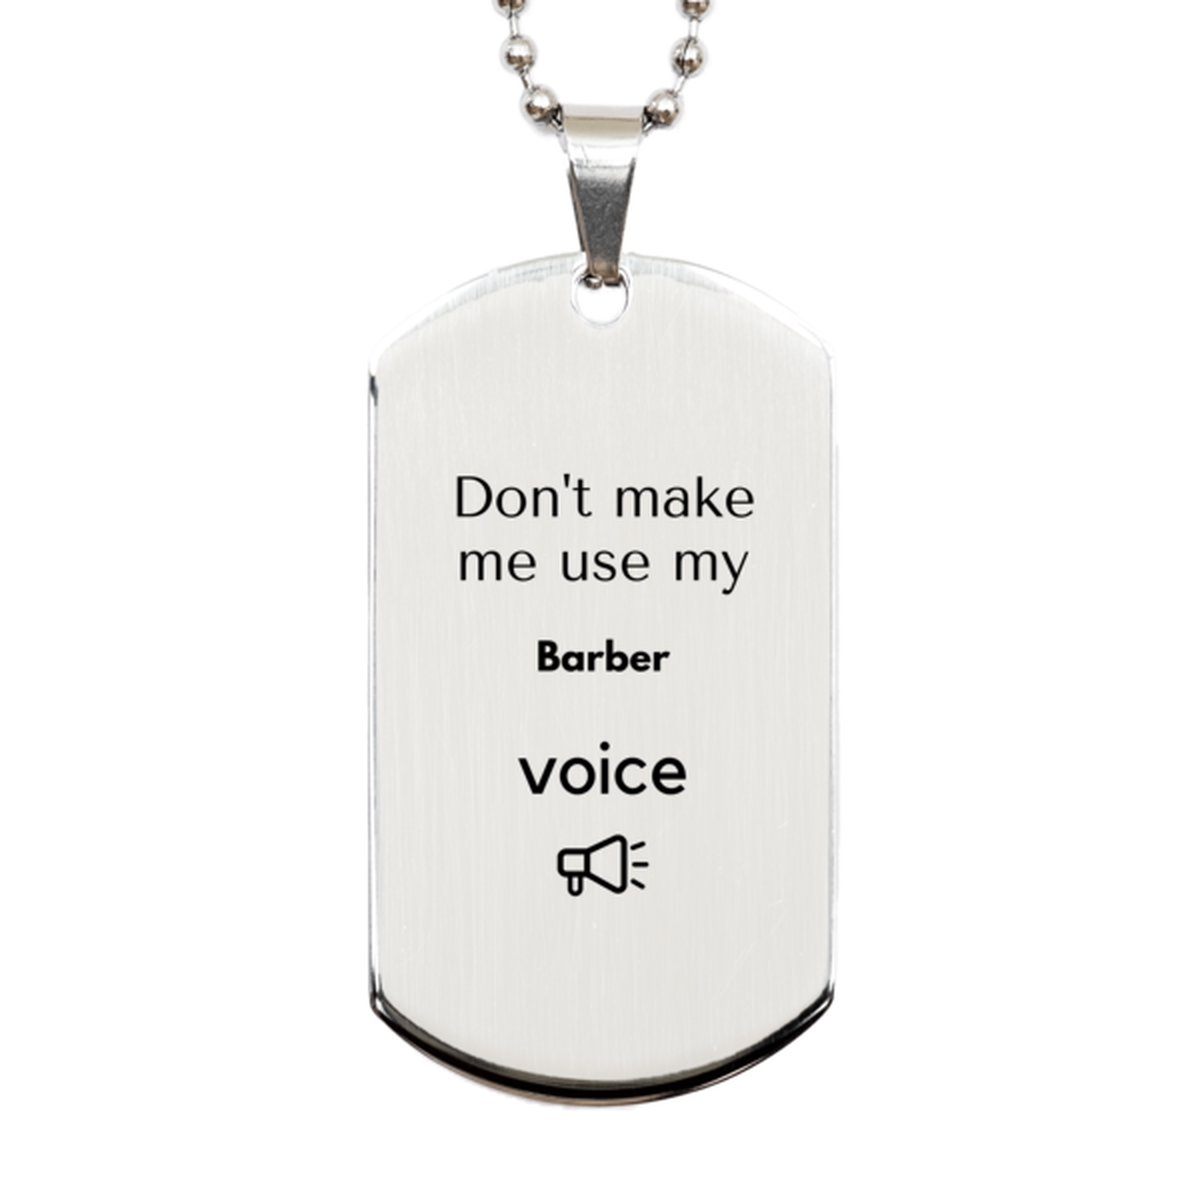 Don't make me use my Barber voice, Sarcasm Barber Gifts, Christmas Barber Silver Dog Tag Birthday Unique Gifts For Barber Coworkers, Men, Women, Colleague, Friends